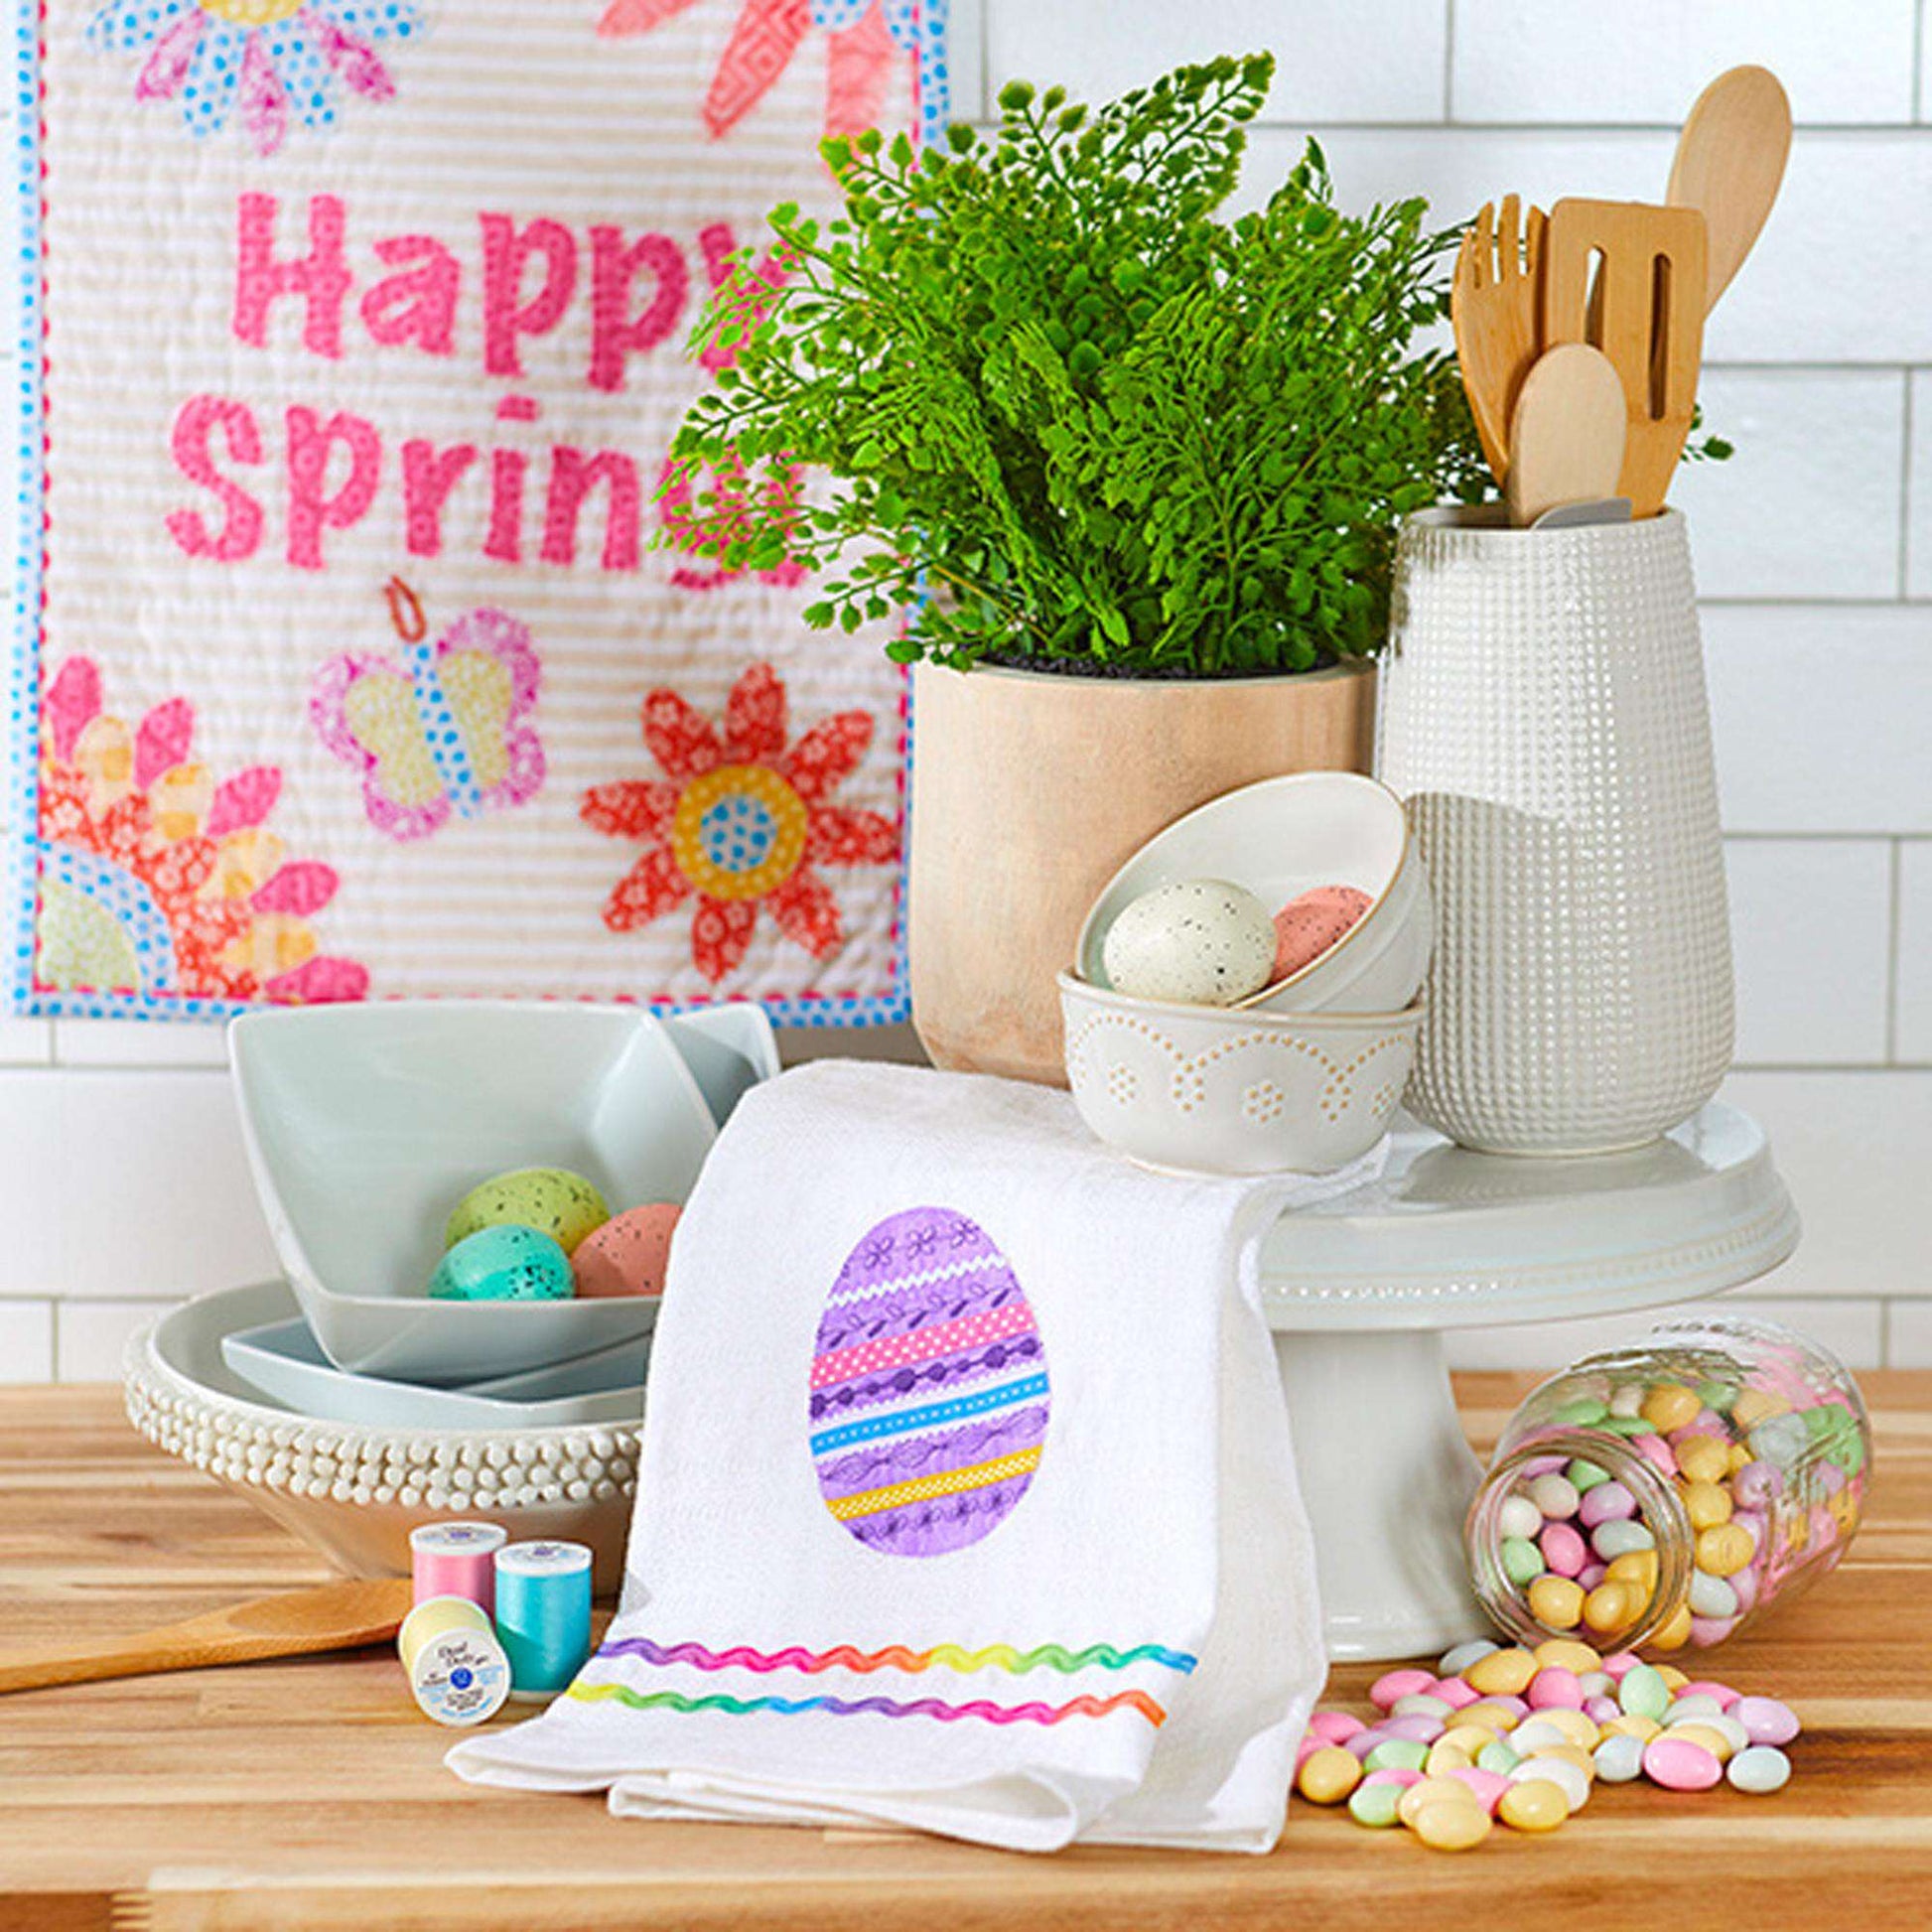 Free Coats & Clark Easter Egg Dish Towel Sewing Pattern